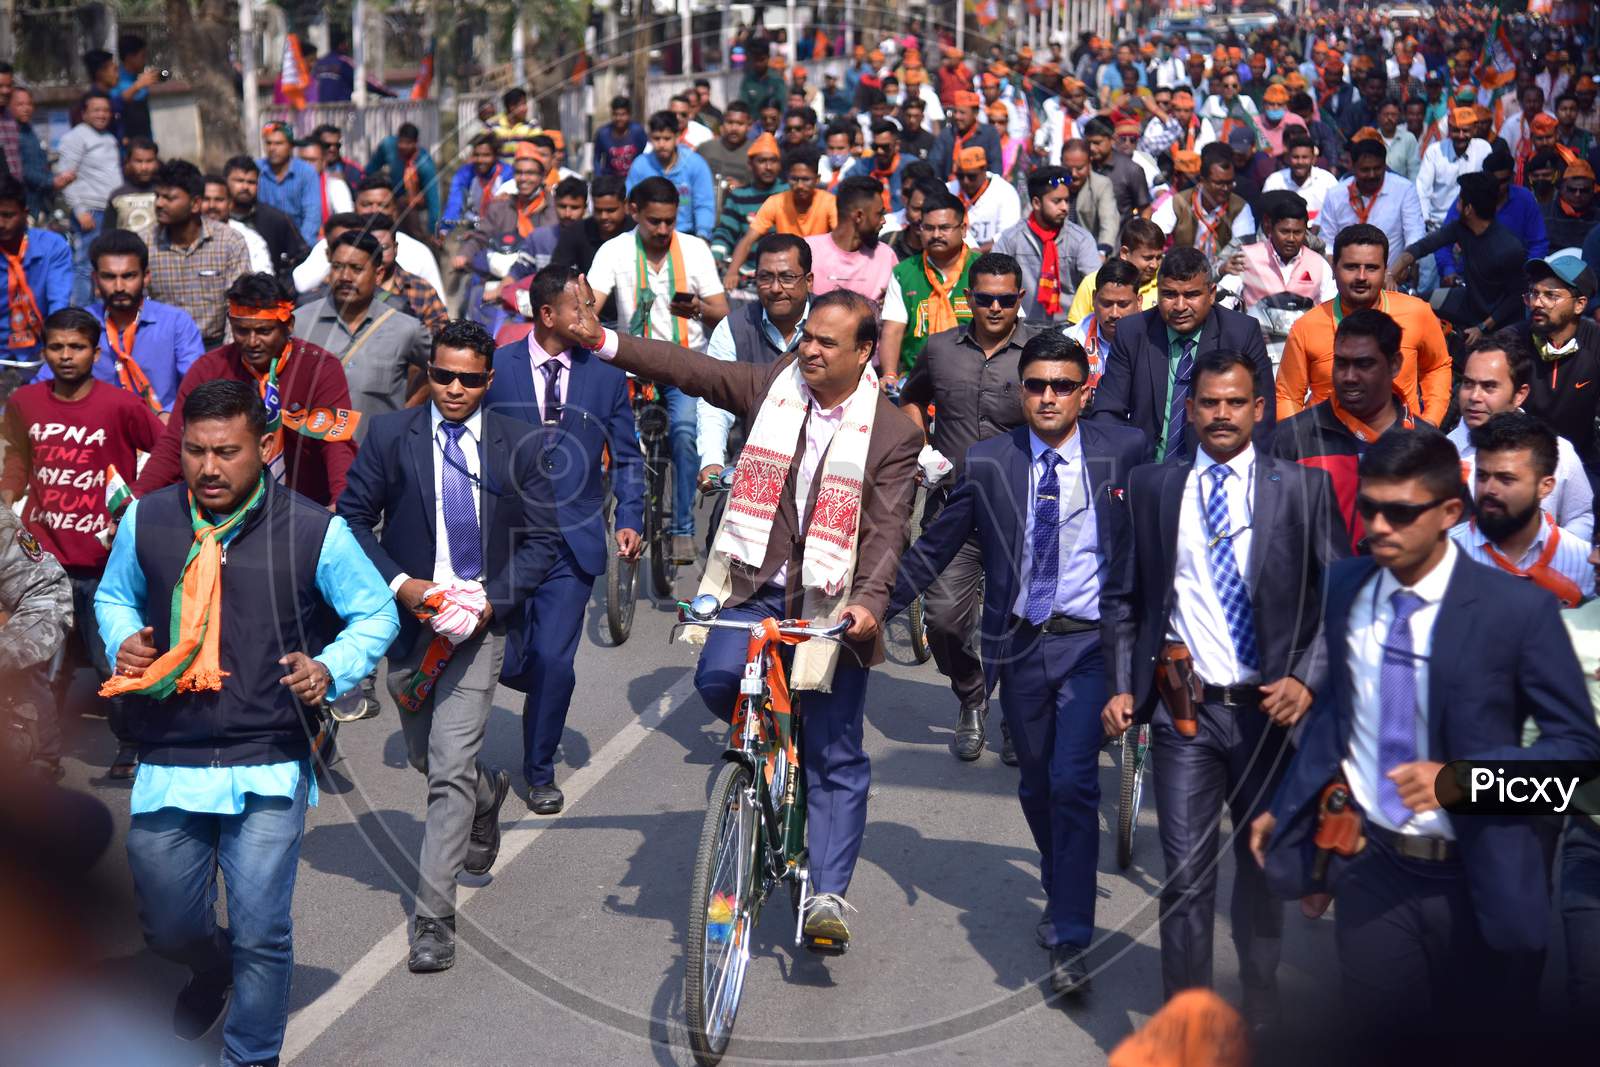 orth East Democratic Alliance (NEDA) convenor and Assam health, finance, education minister Dr. Himanta Biswa Sarma took part in a mega bicycle rally in Nagaon District of Assam on Feb 3,202